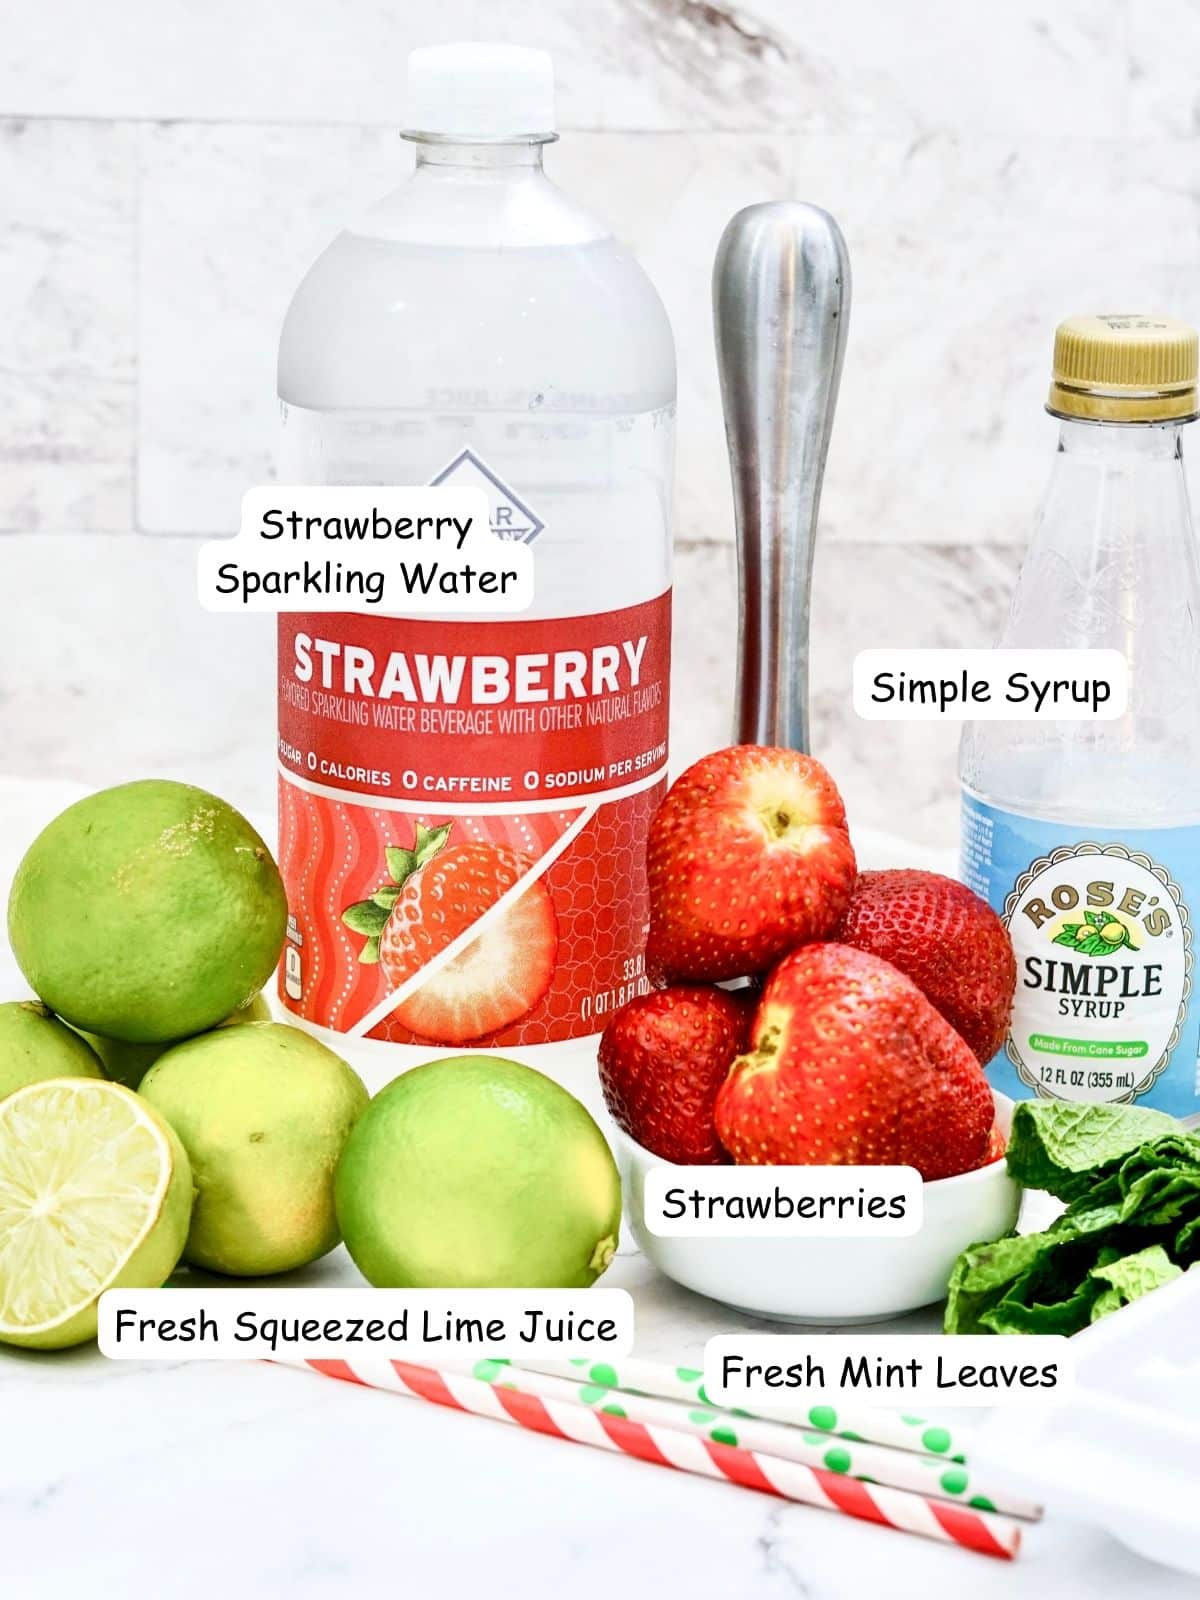 Ingredients sparkling water, limes, strawberries and fresh mint leaves.